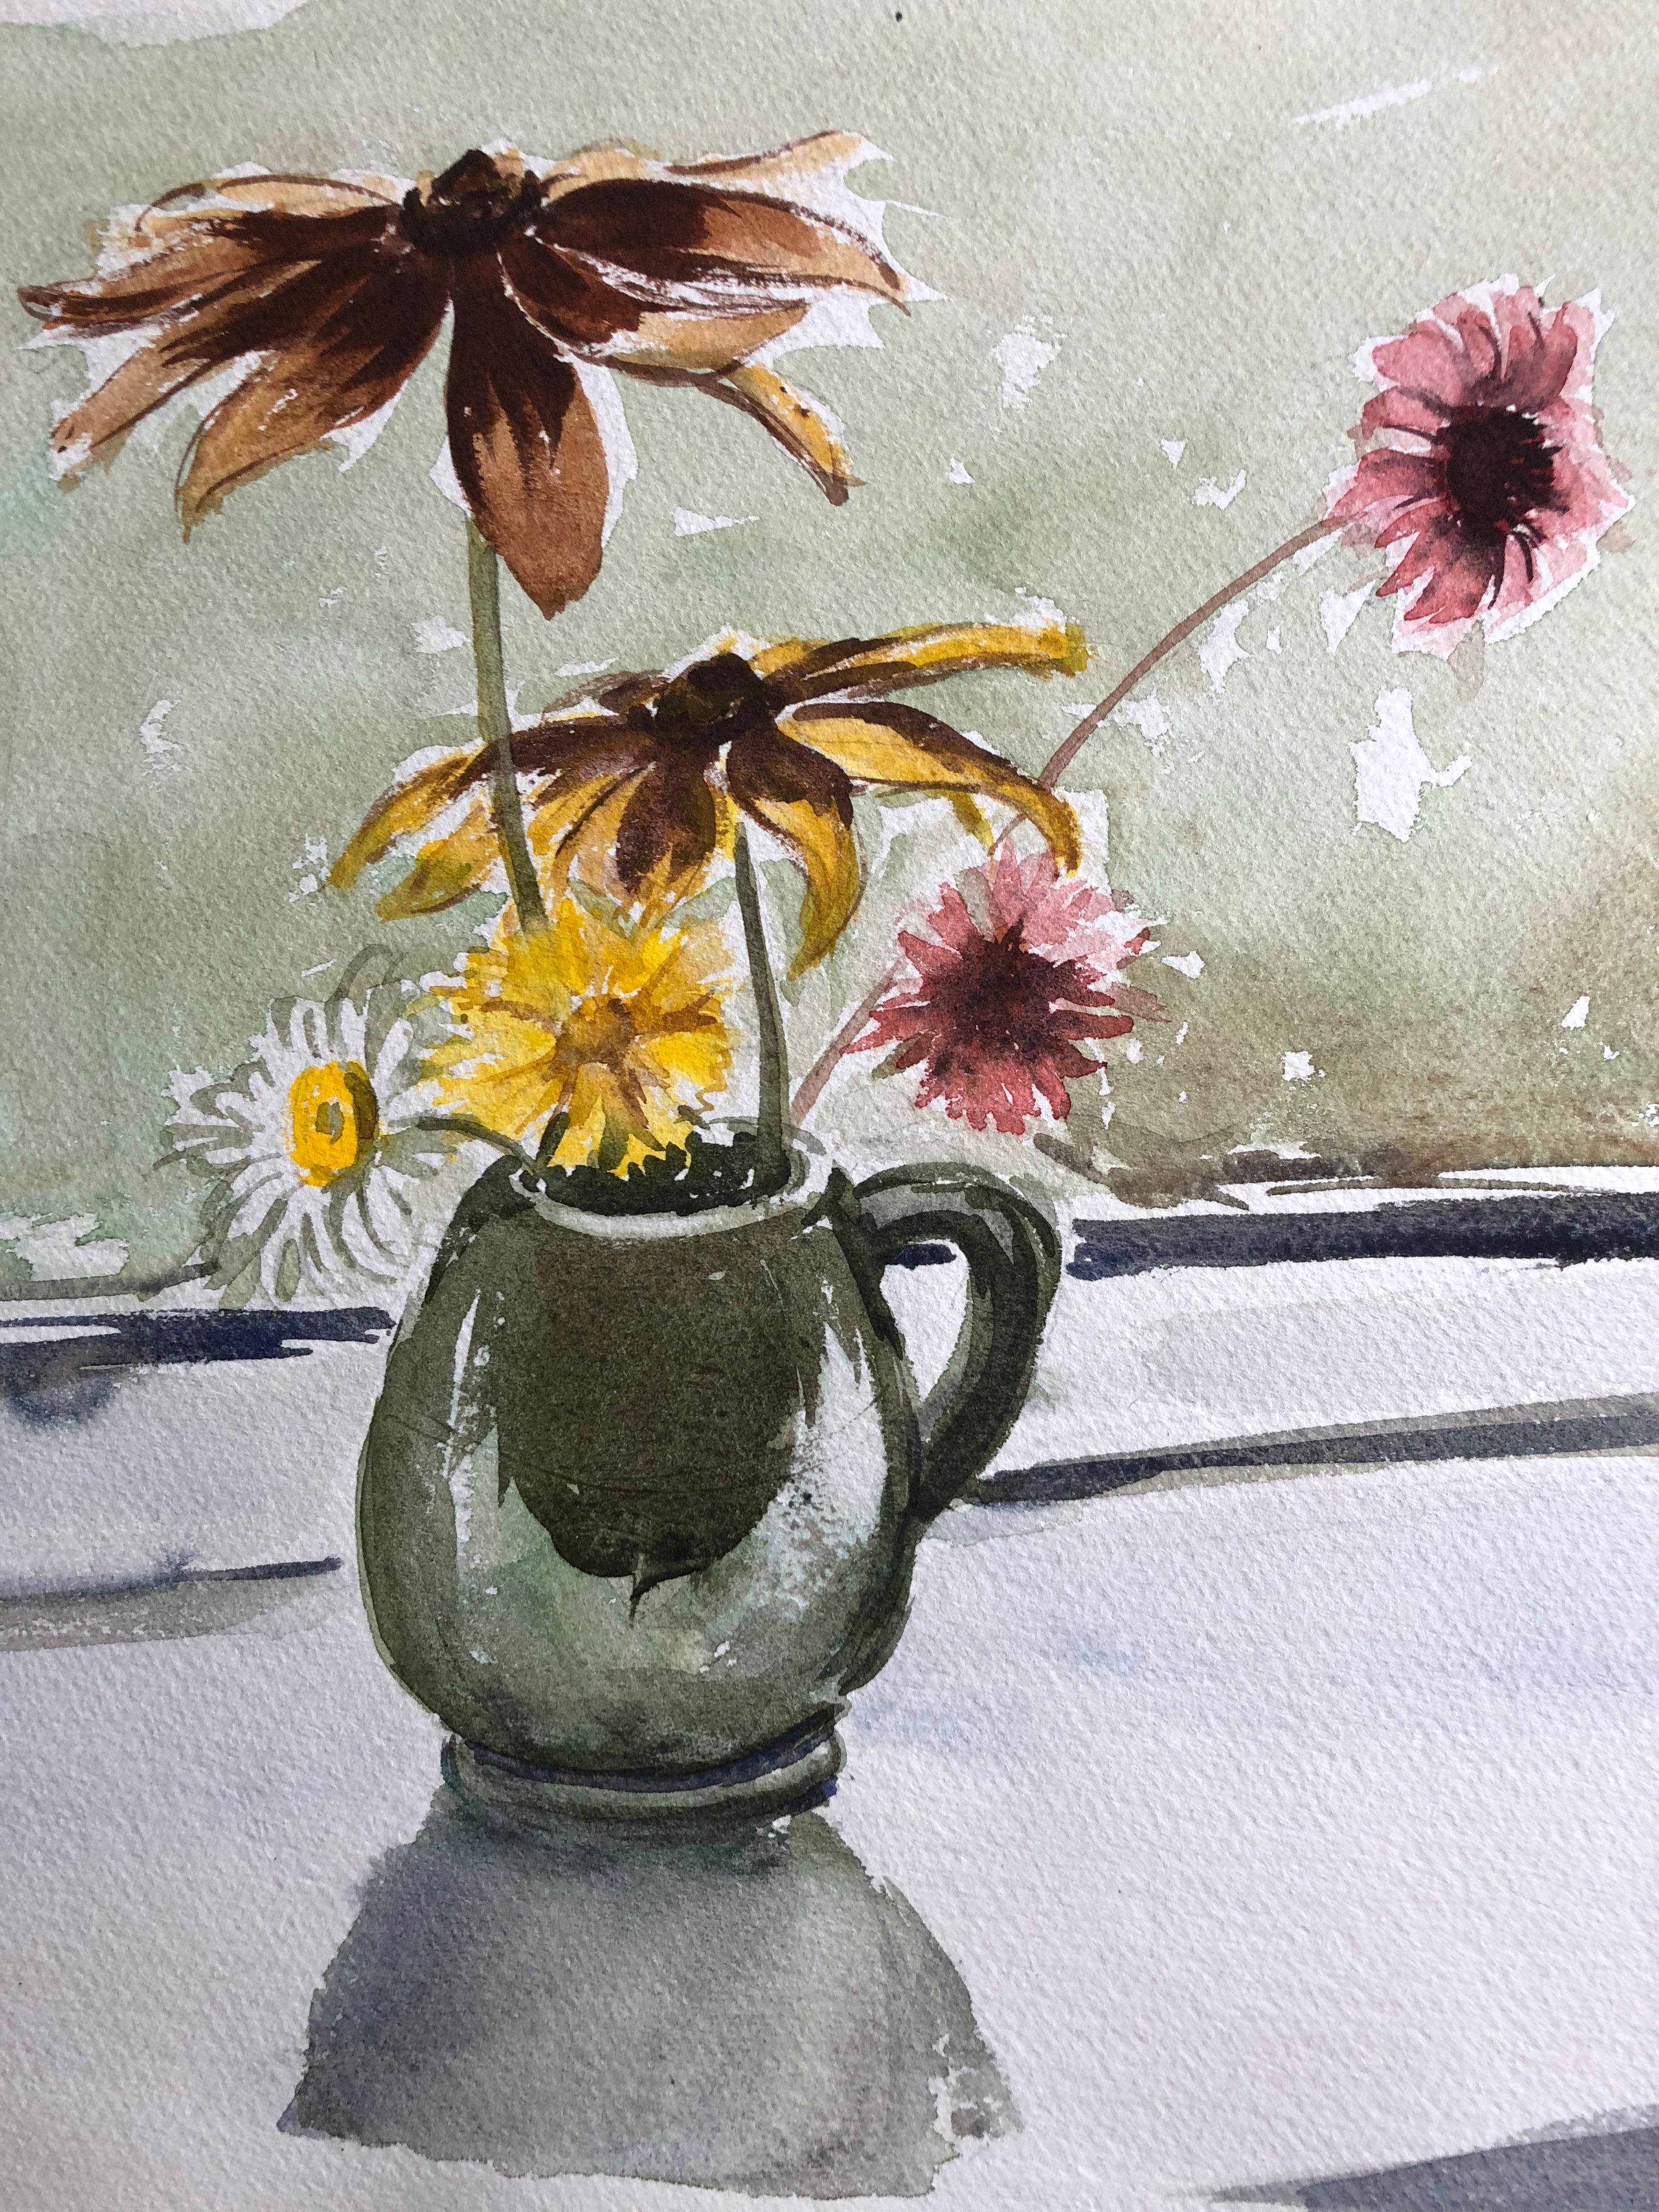 Vase of Flowers, original British watercolour painting - Painting by Ronald Birch